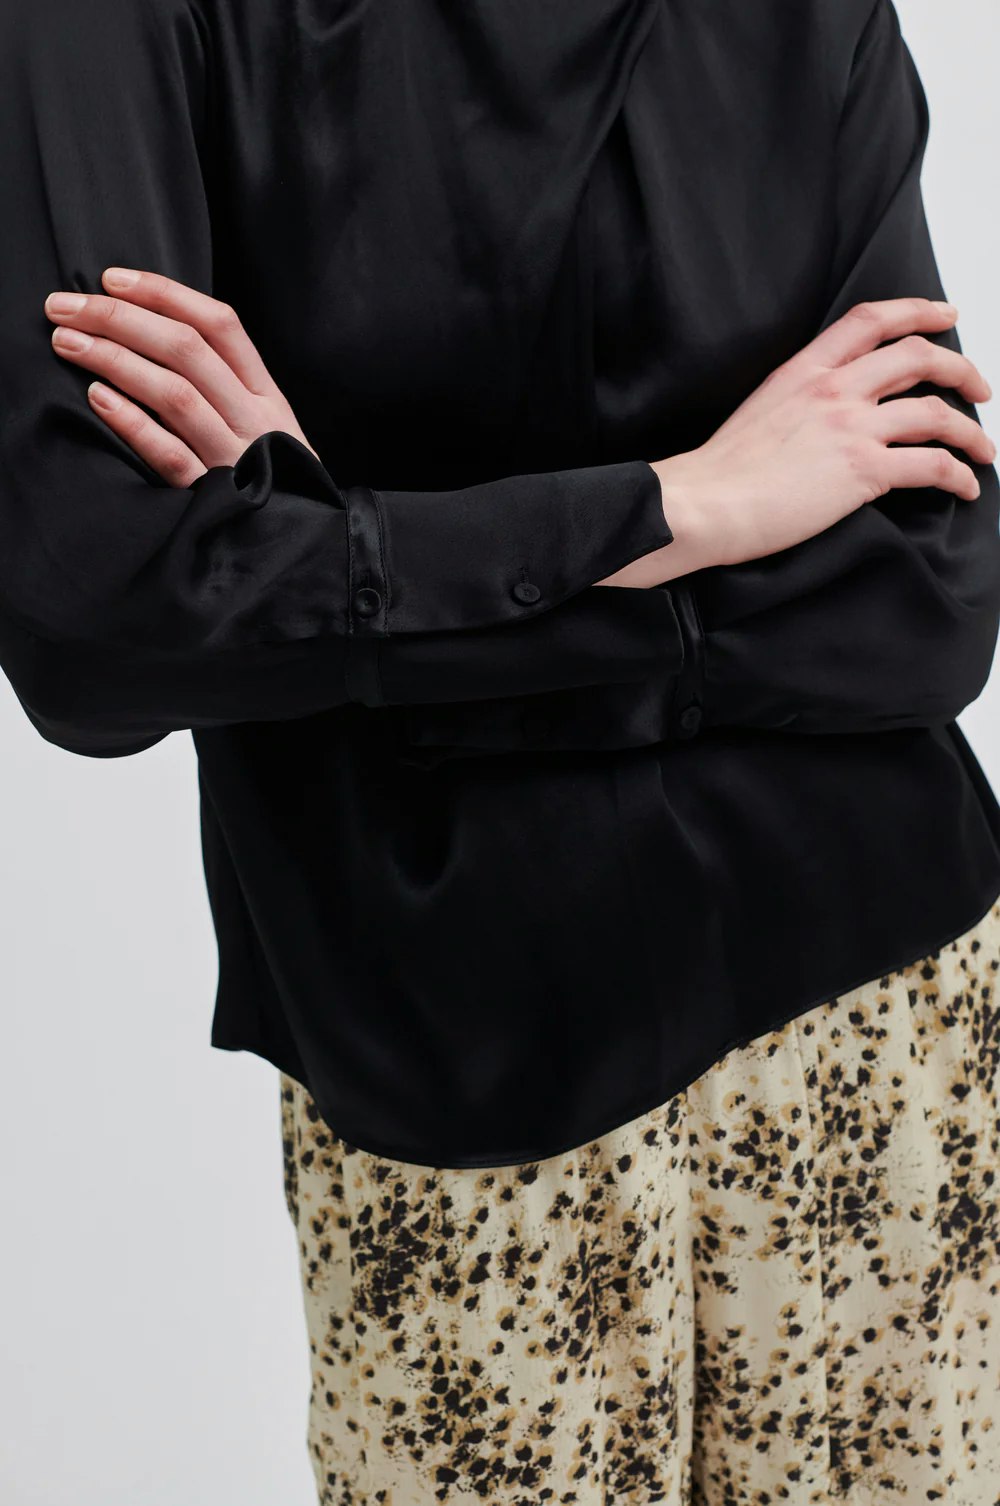 Fearless Blouse Black Second Female